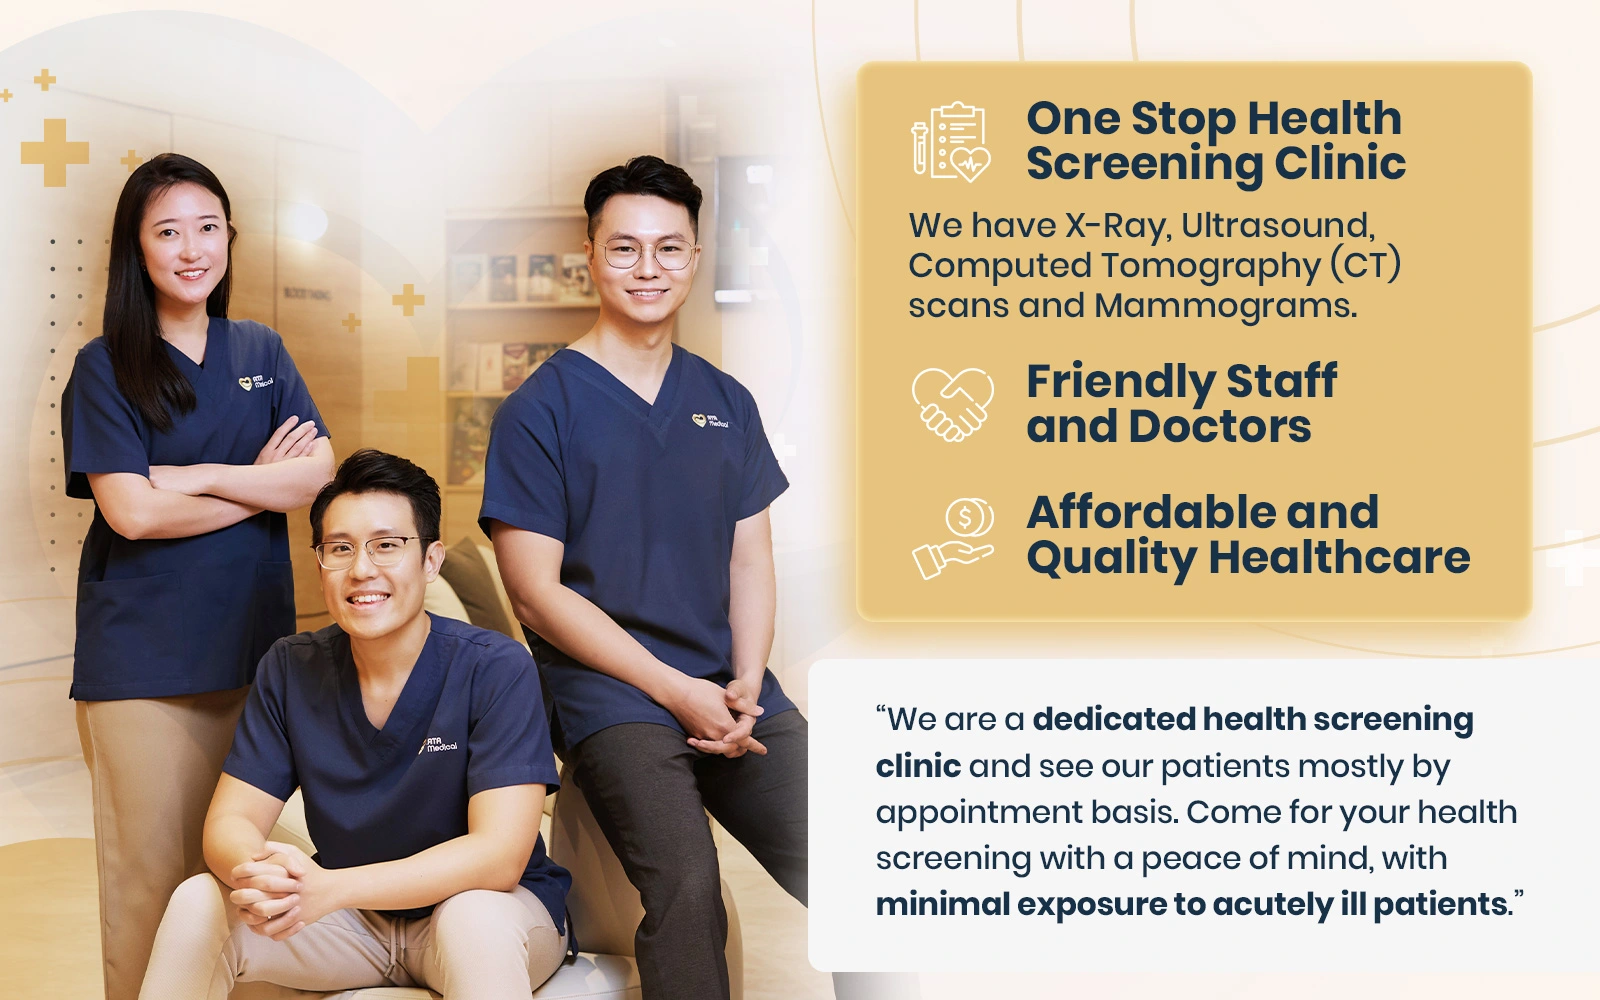 Why Choose Us? We are a one stop health screening clinic with X-Ray, Ultrasound, Computed Tomography (CT) scan and Mammogram facilities.